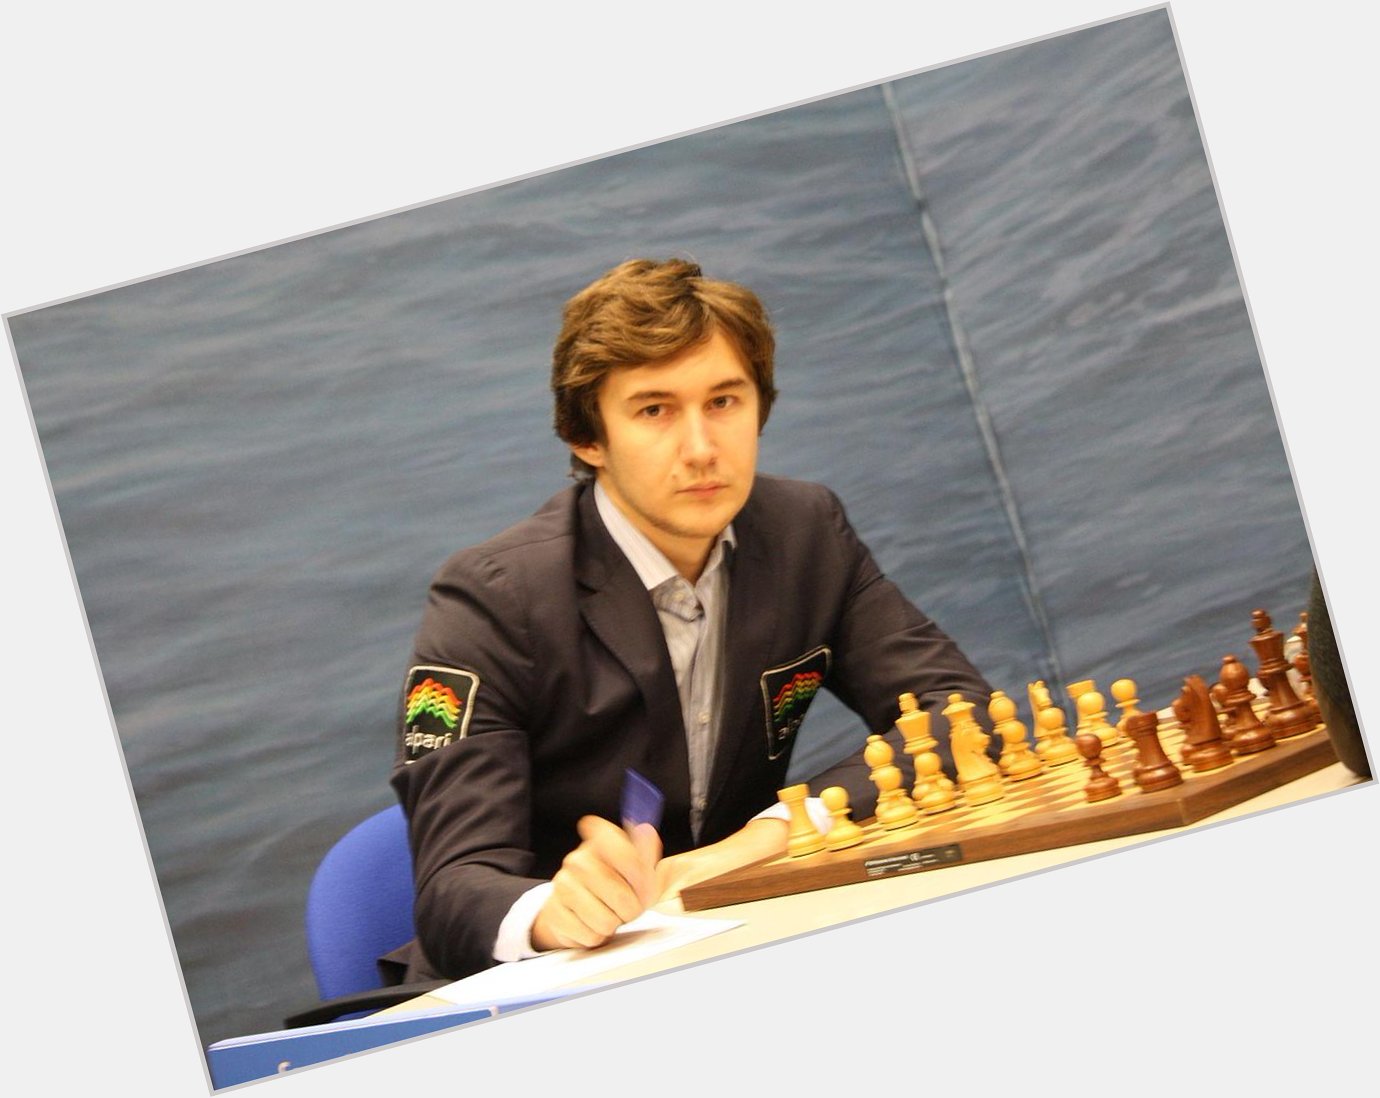 Happy 25th Birthday to Sergey Karjakin! In 2009 he won the Corus (from 2011 its tournament with 8/13 